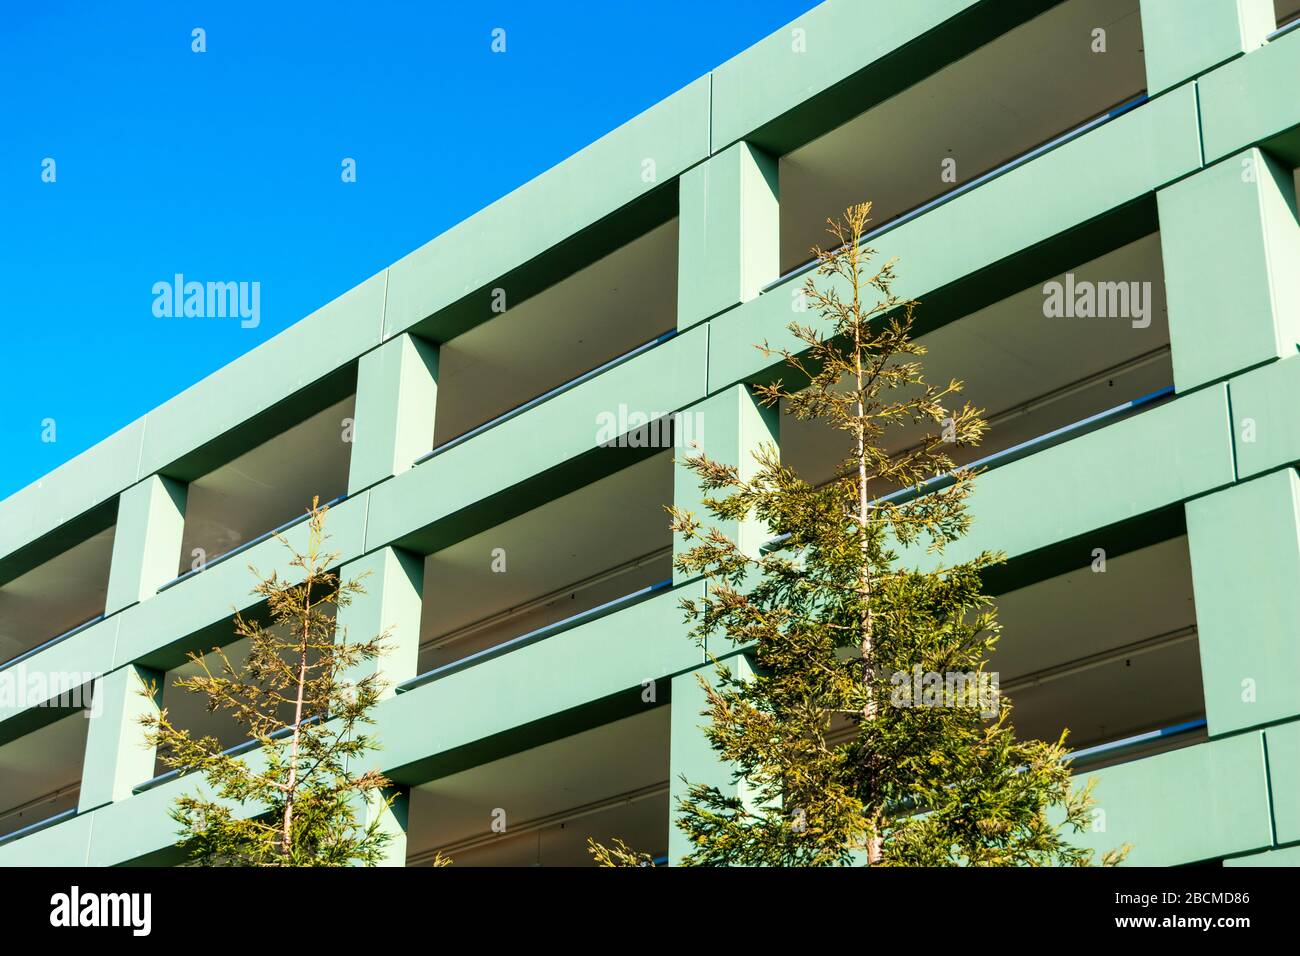 Multi level parking garage facade and exterior. Foreground green trees. Background blue sky. Stock Photo